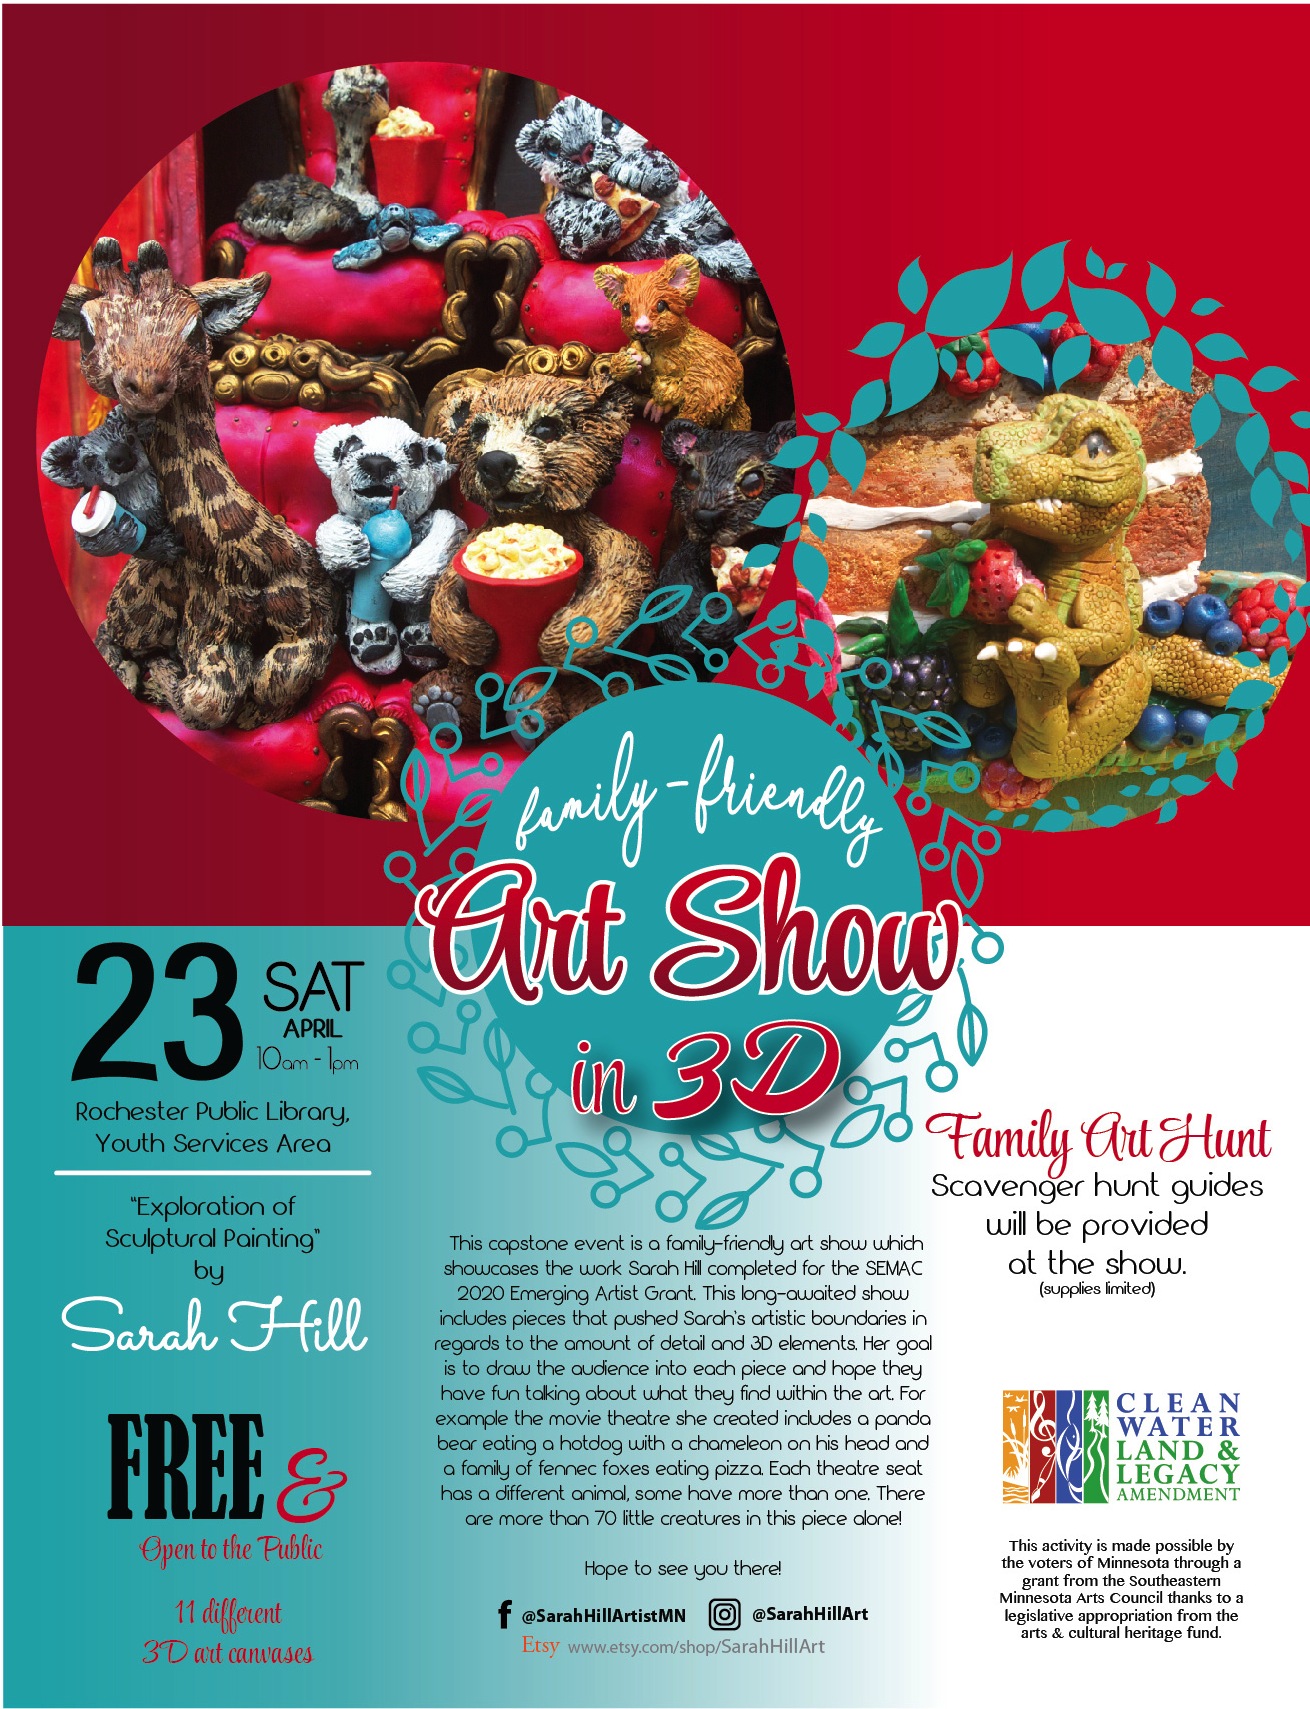 Flyer with images of 3D animals and event details. 